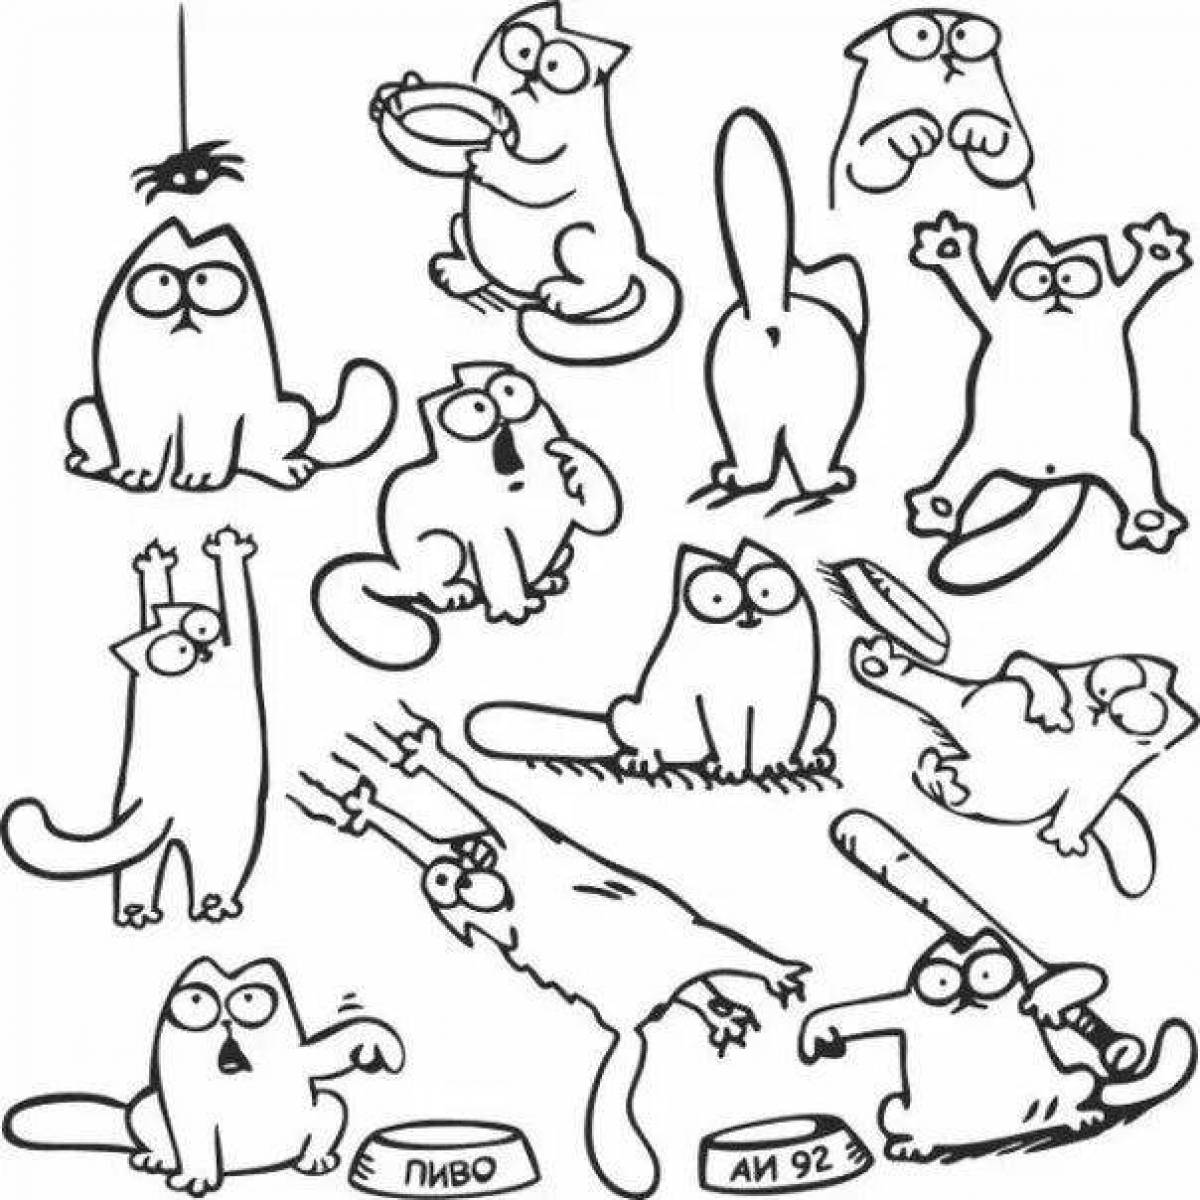 Exotic cats coloring page